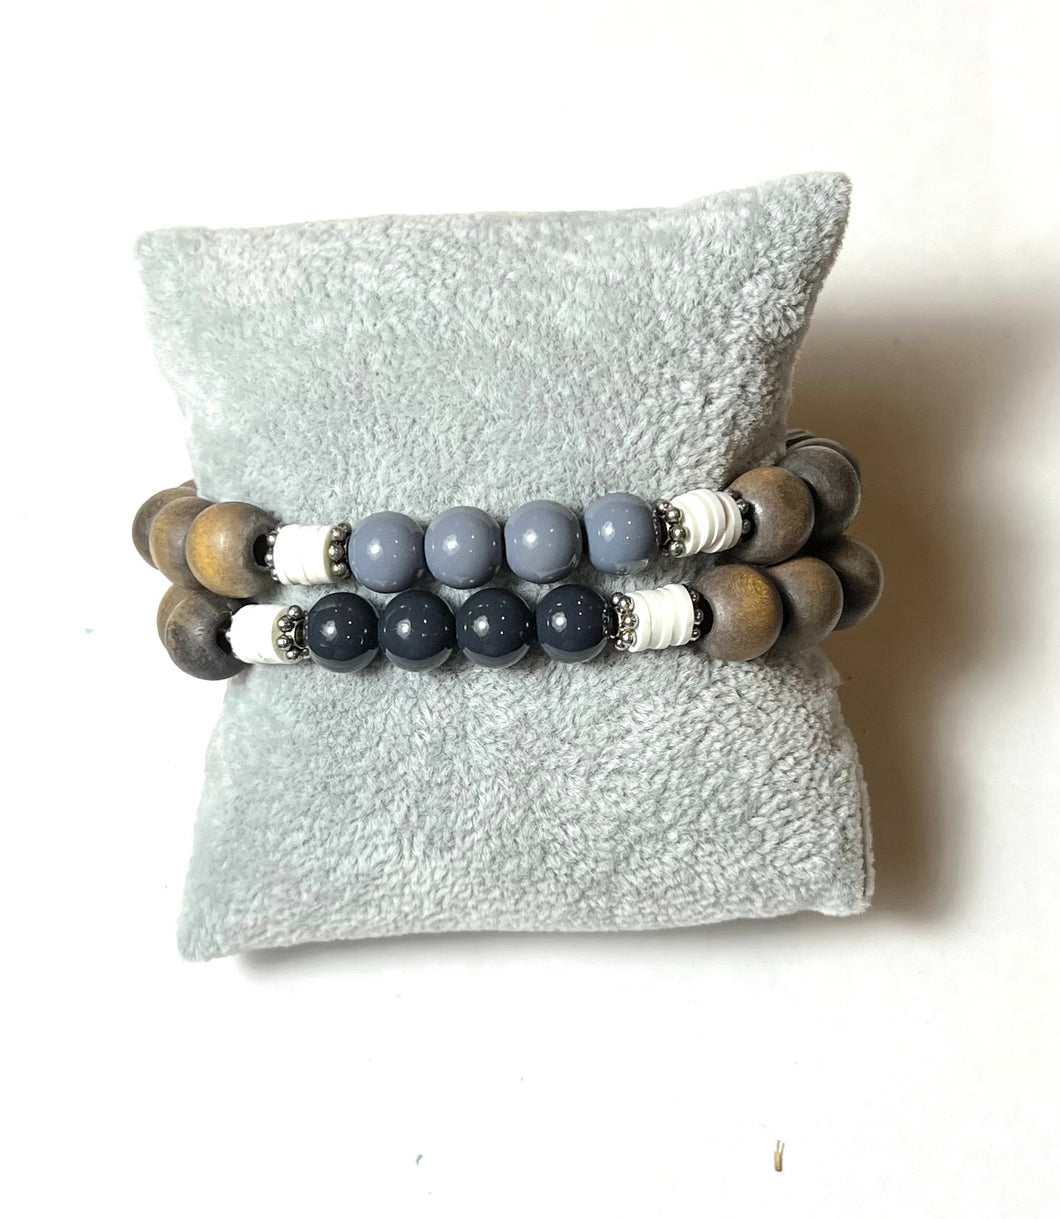 L & J COLLECTION BRACELET: STACKER WOOD AND GLASS BEAD MIX